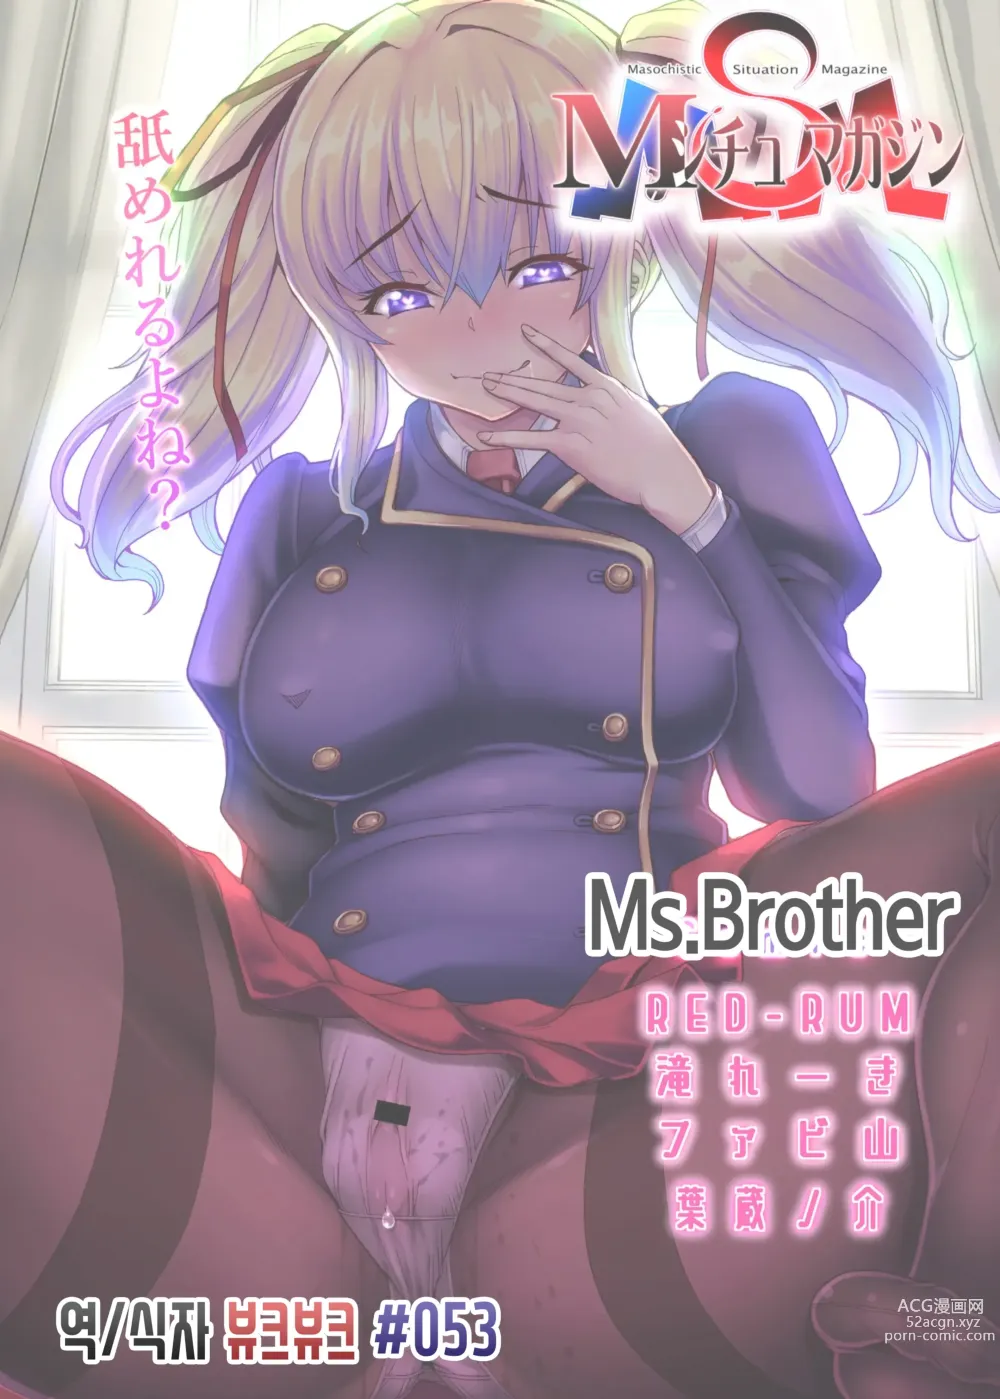 Page 1 of doujinshi Ms.Brother